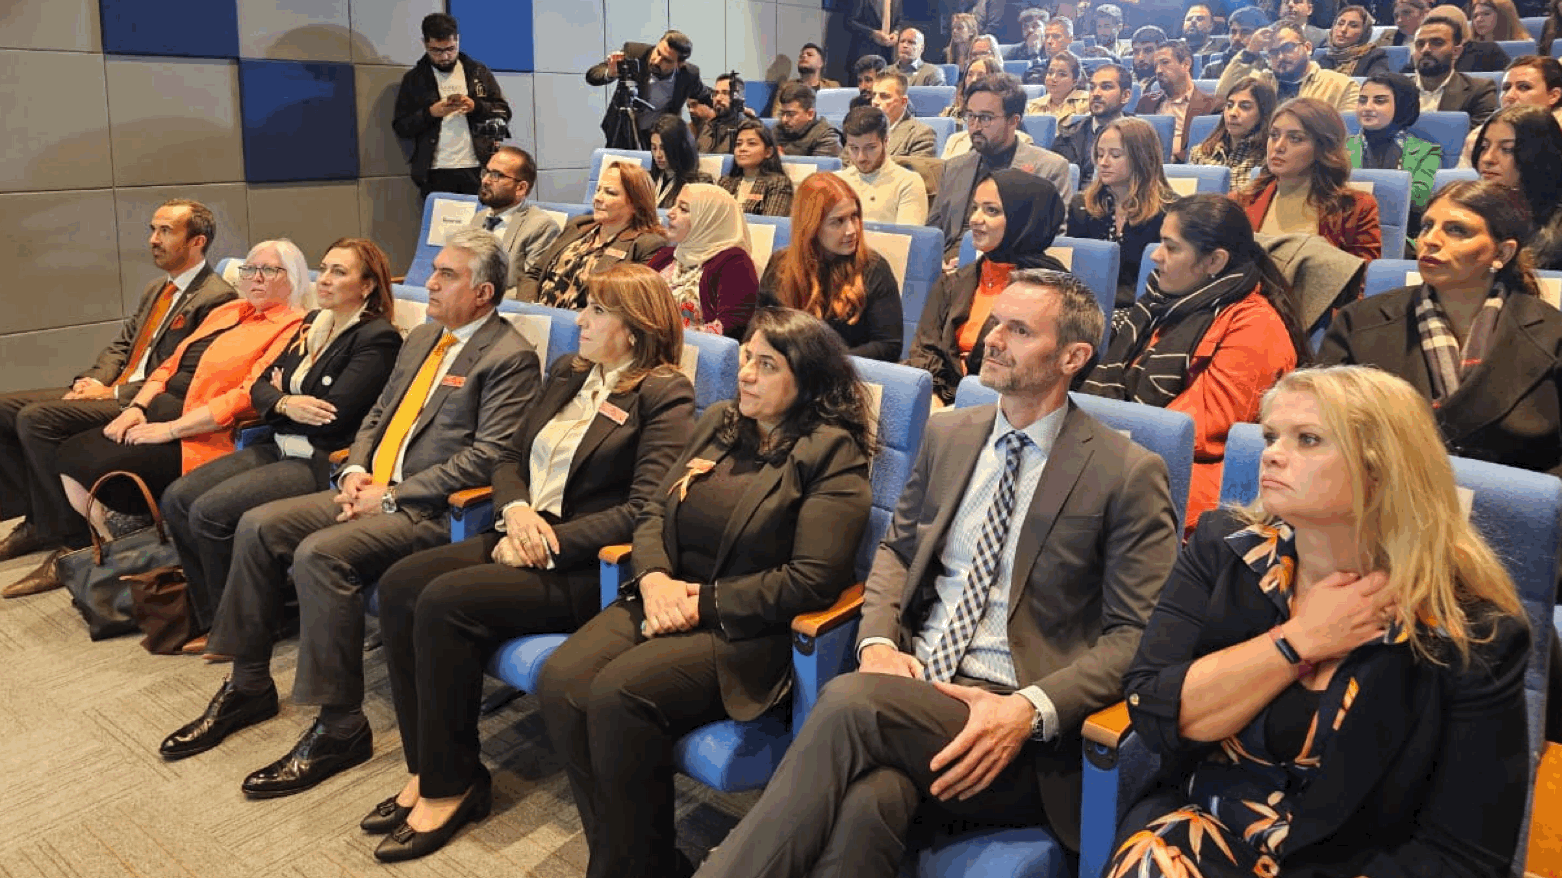 The consulates of the UK, Canada, Netherlands and Germany organized an event for the international 16 Days of Activism Against Gender-Based Violence campaign, Nov. 27, 2023 (Photo: Wladimir van Wilgenburg/Kurdistan 24)